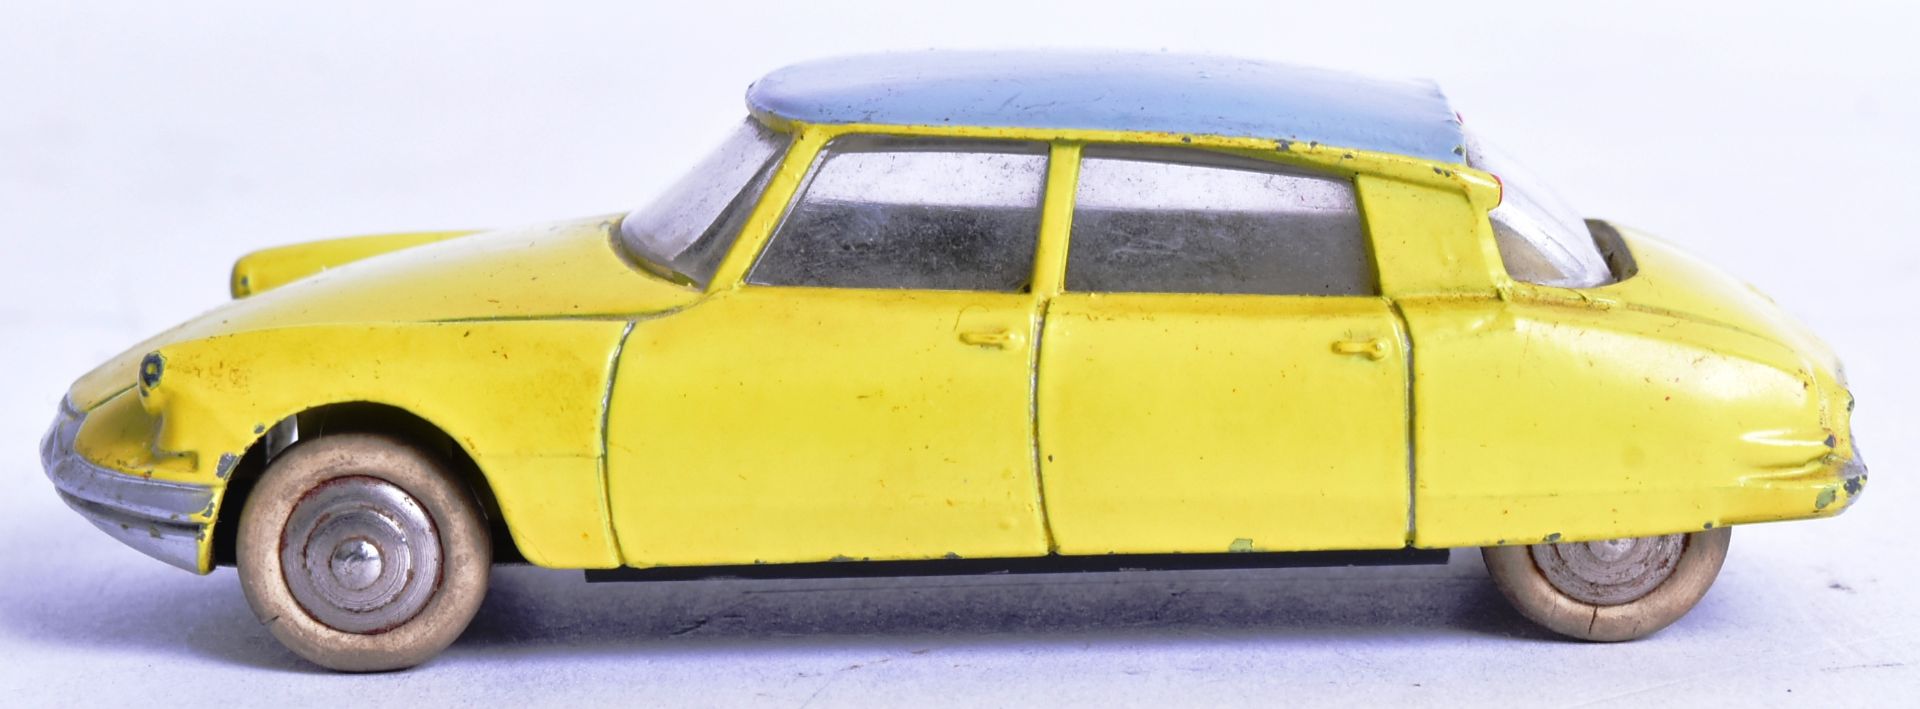 DIECAST - FRENCH DINKY TOYS - CITROEN DS 19 - Image 2 of 5